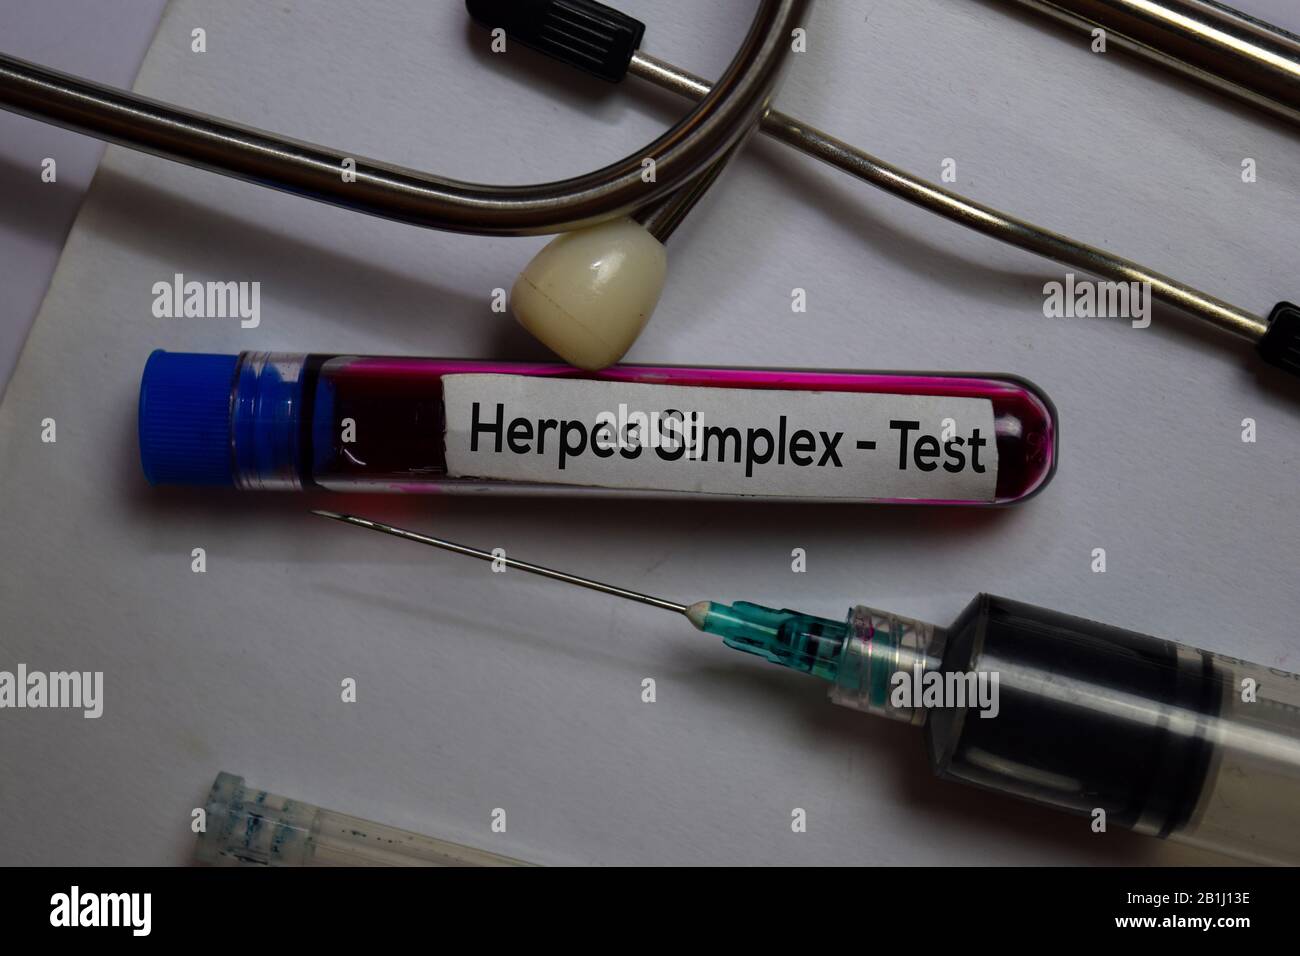 Herpes Simplex - Test with blood sample. Top view isolated on office desk. Healthcare/Medical concept Stock Photo